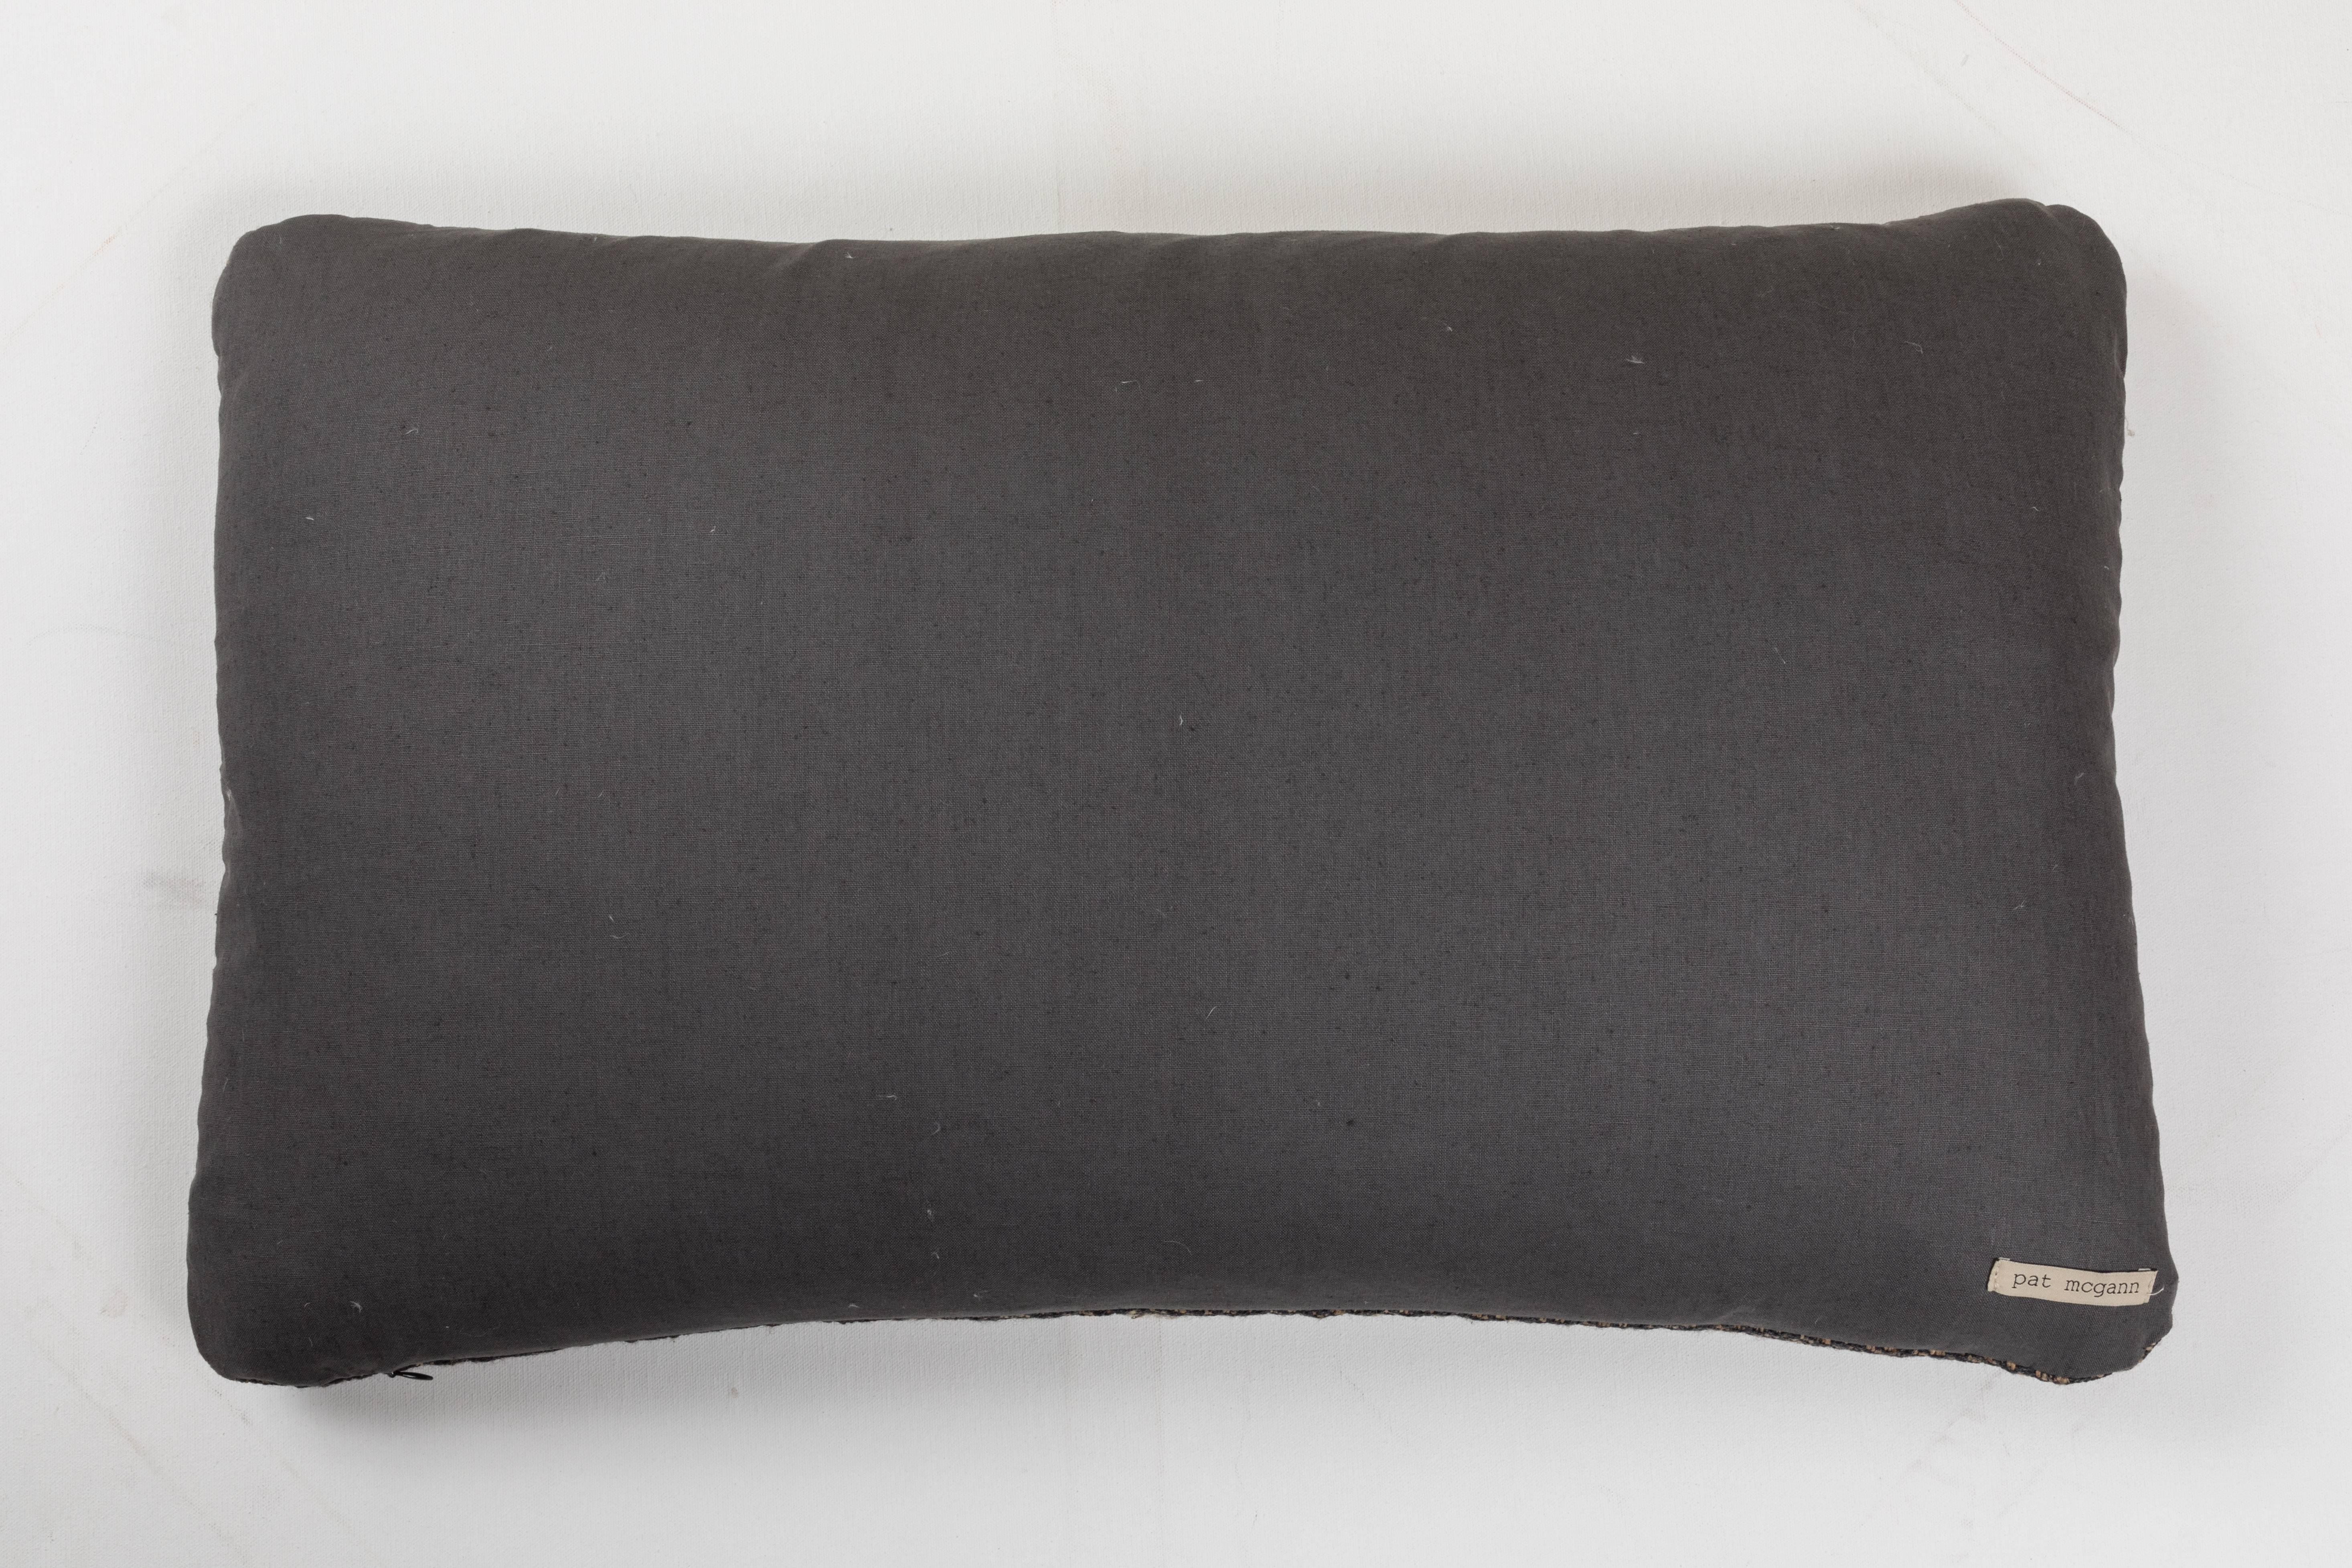 Indian Handwoven Pillow Charcoal and Tan In Excellent Condition For Sale In Los Angeles, CA